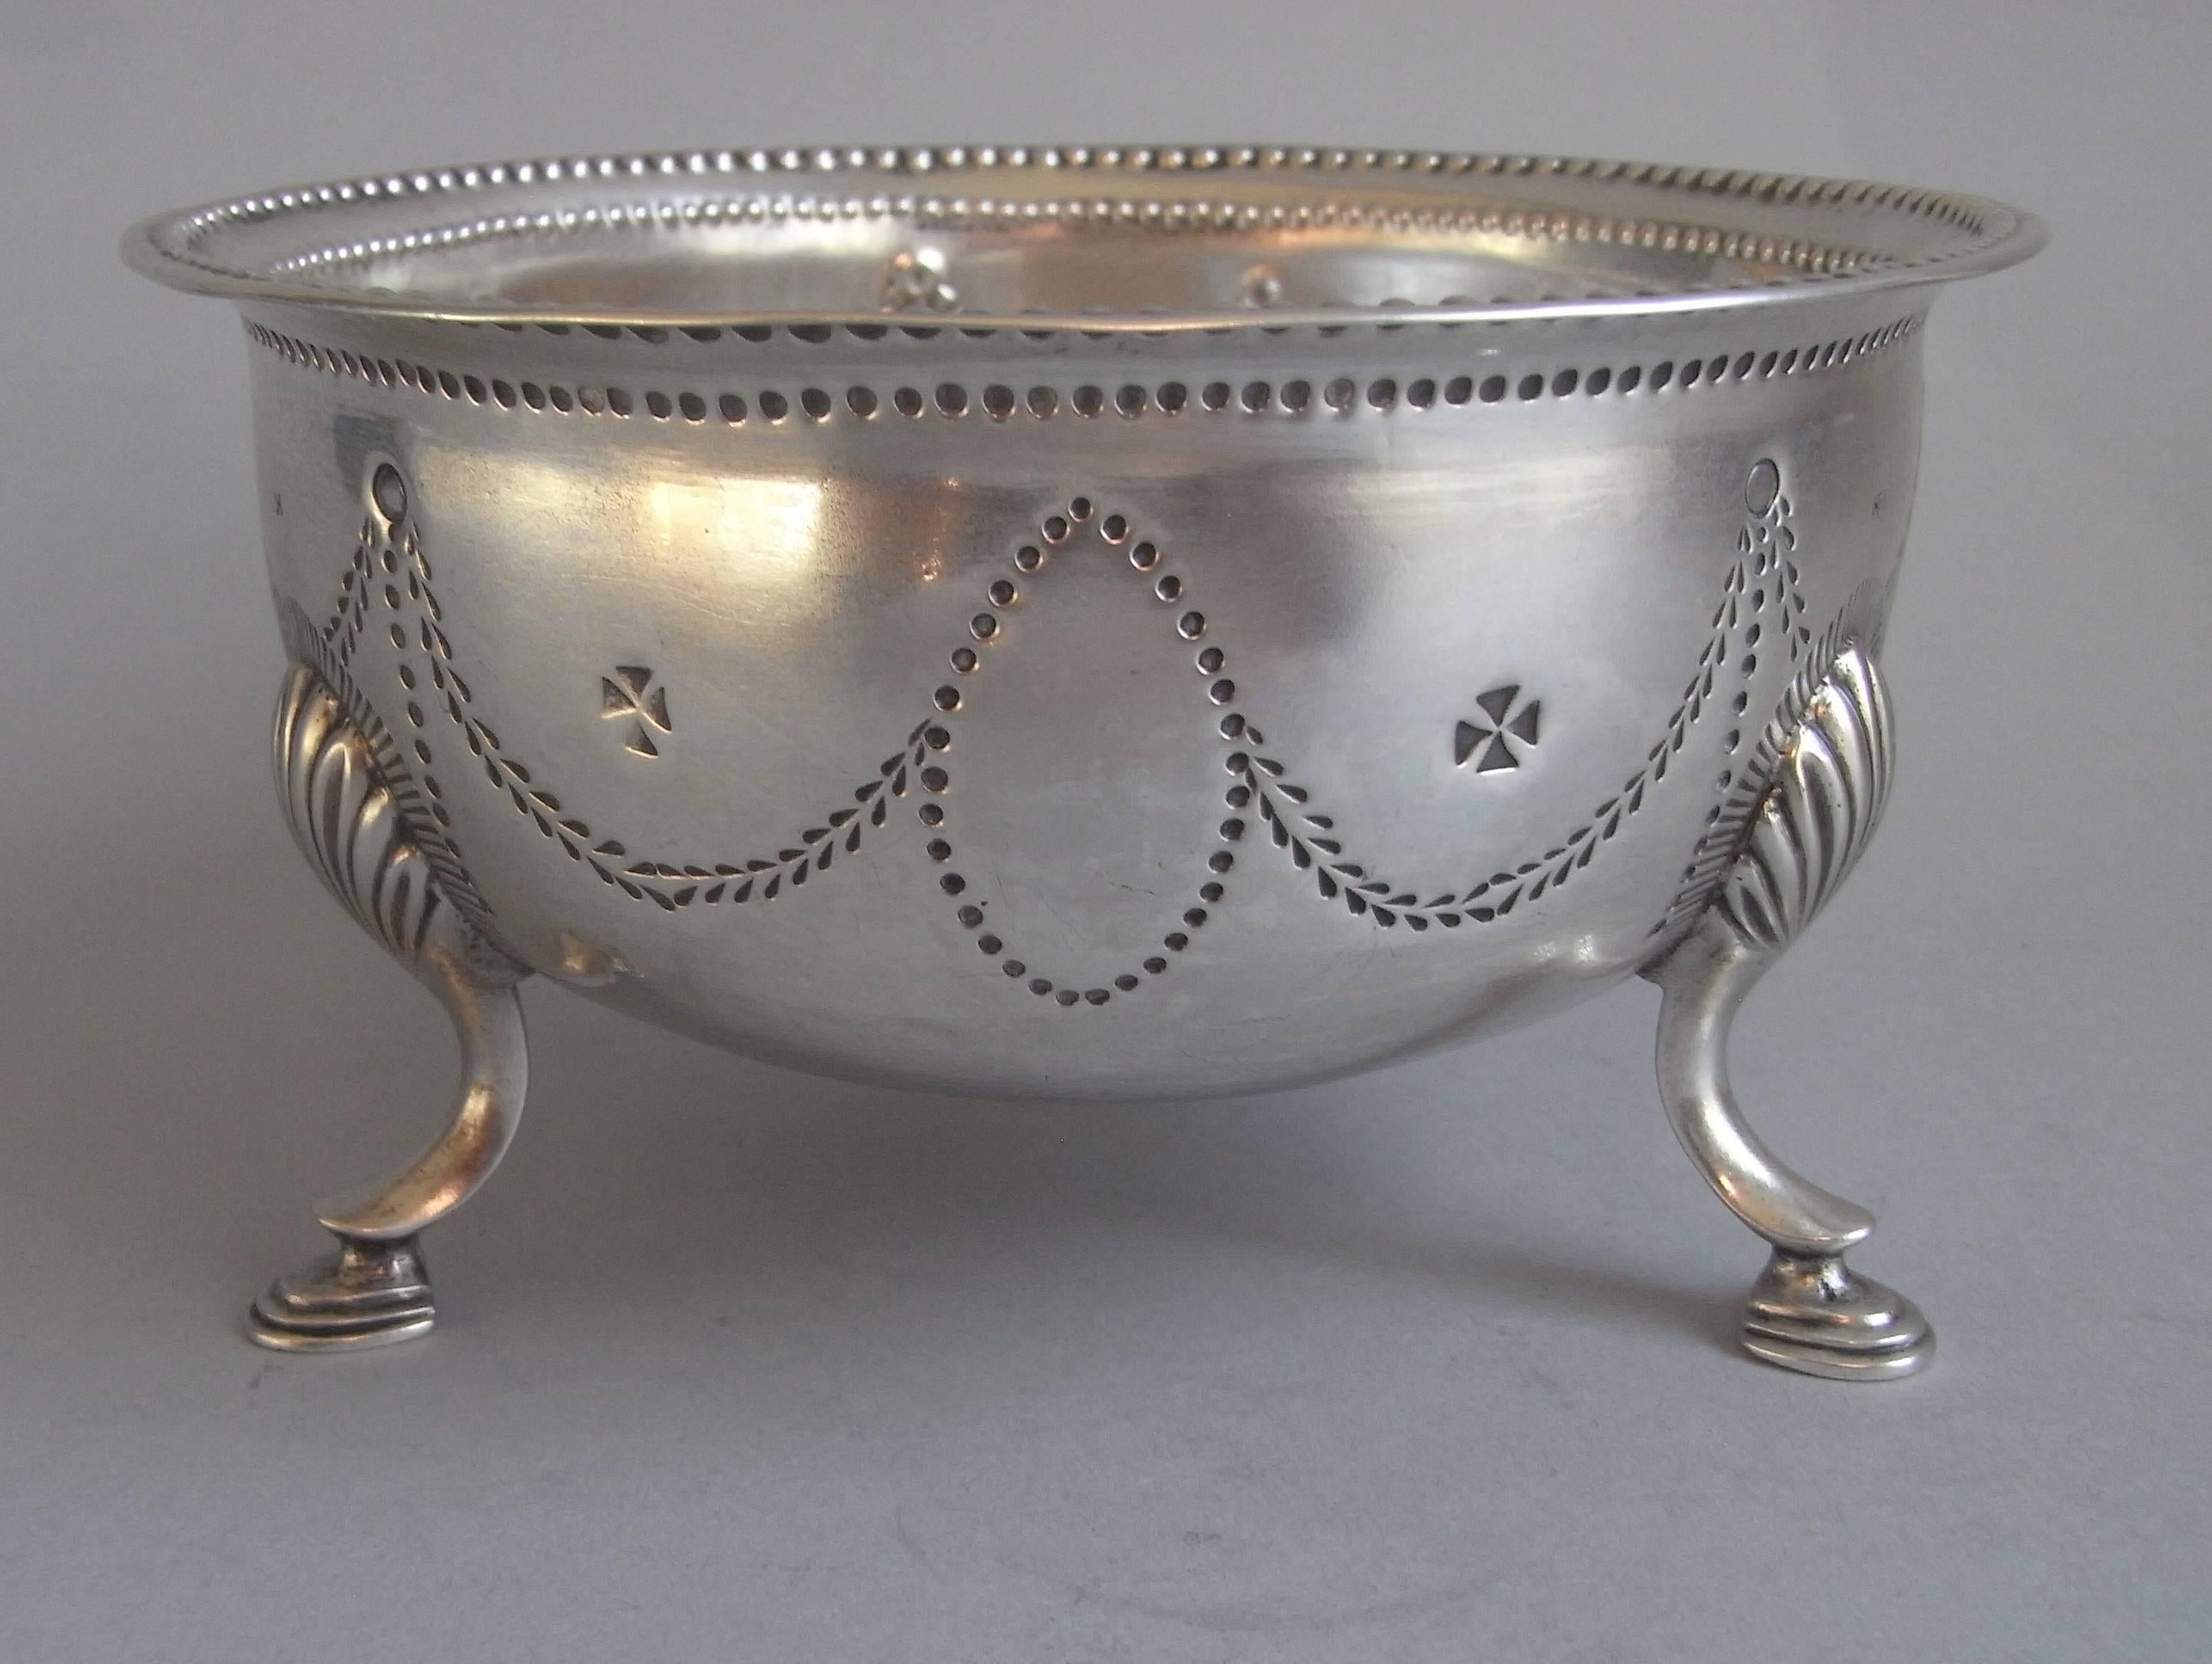 The Bowl is a typical Irish design and stands on three hoof feet, which are attached to the main body with raying shell mouldings. The everted rim is decorated with a double beaded rim. The sides are engraved with Classical stylised foliate